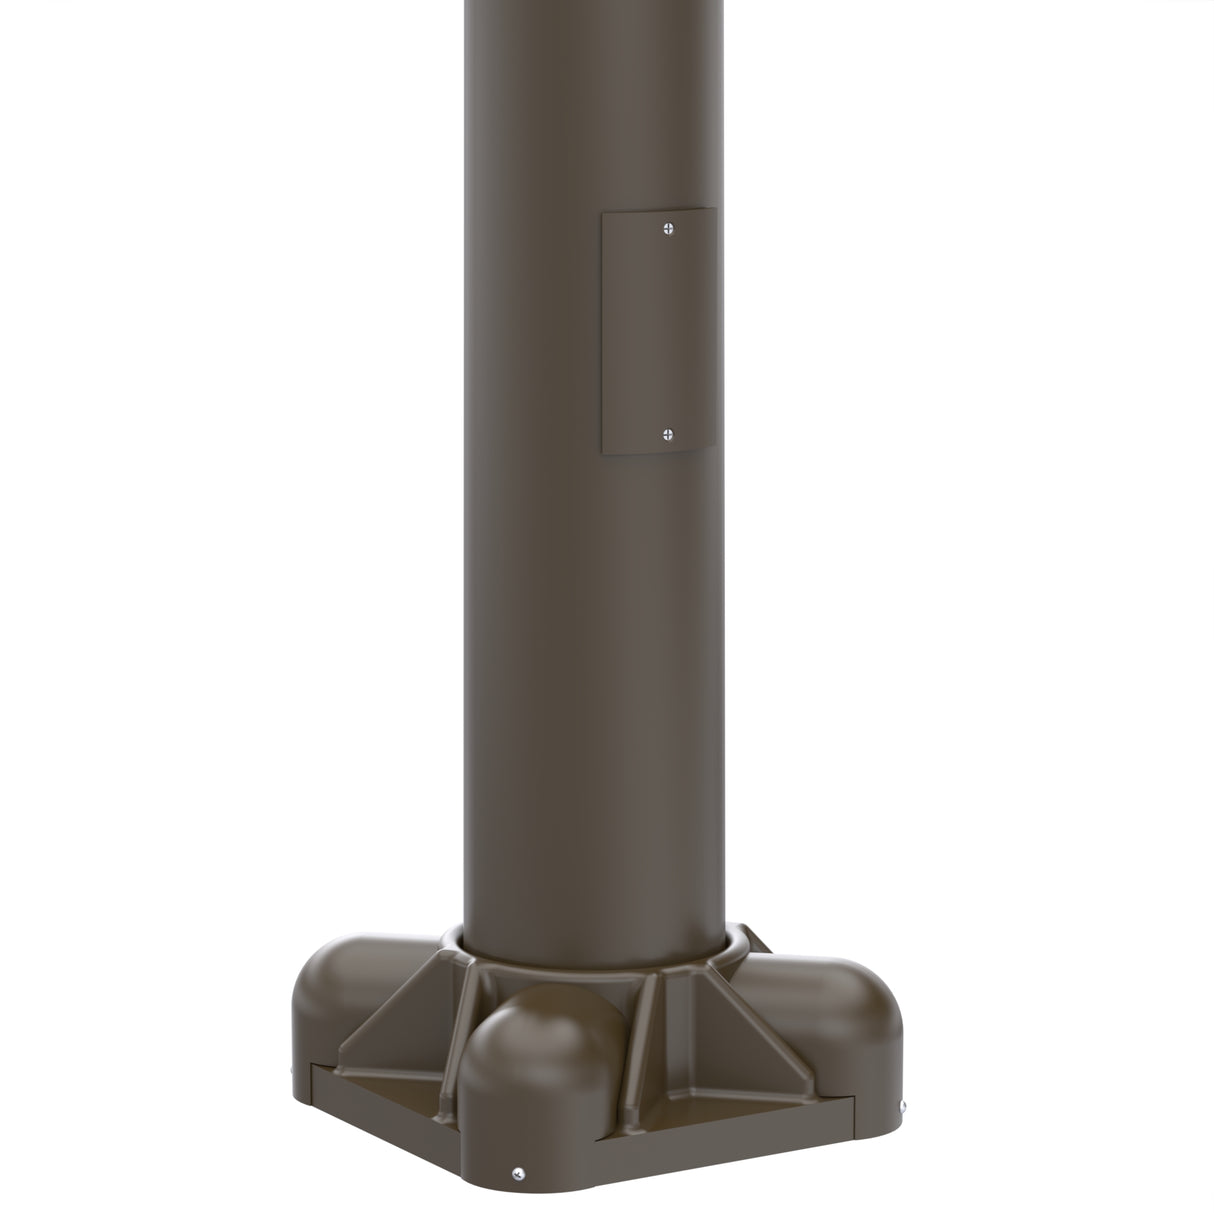 28' Tall x 9.0" Base OD x 4.5" Top OD x 0.188" Thick, Round Tapered Aluminum, Anchor Base Light Pole